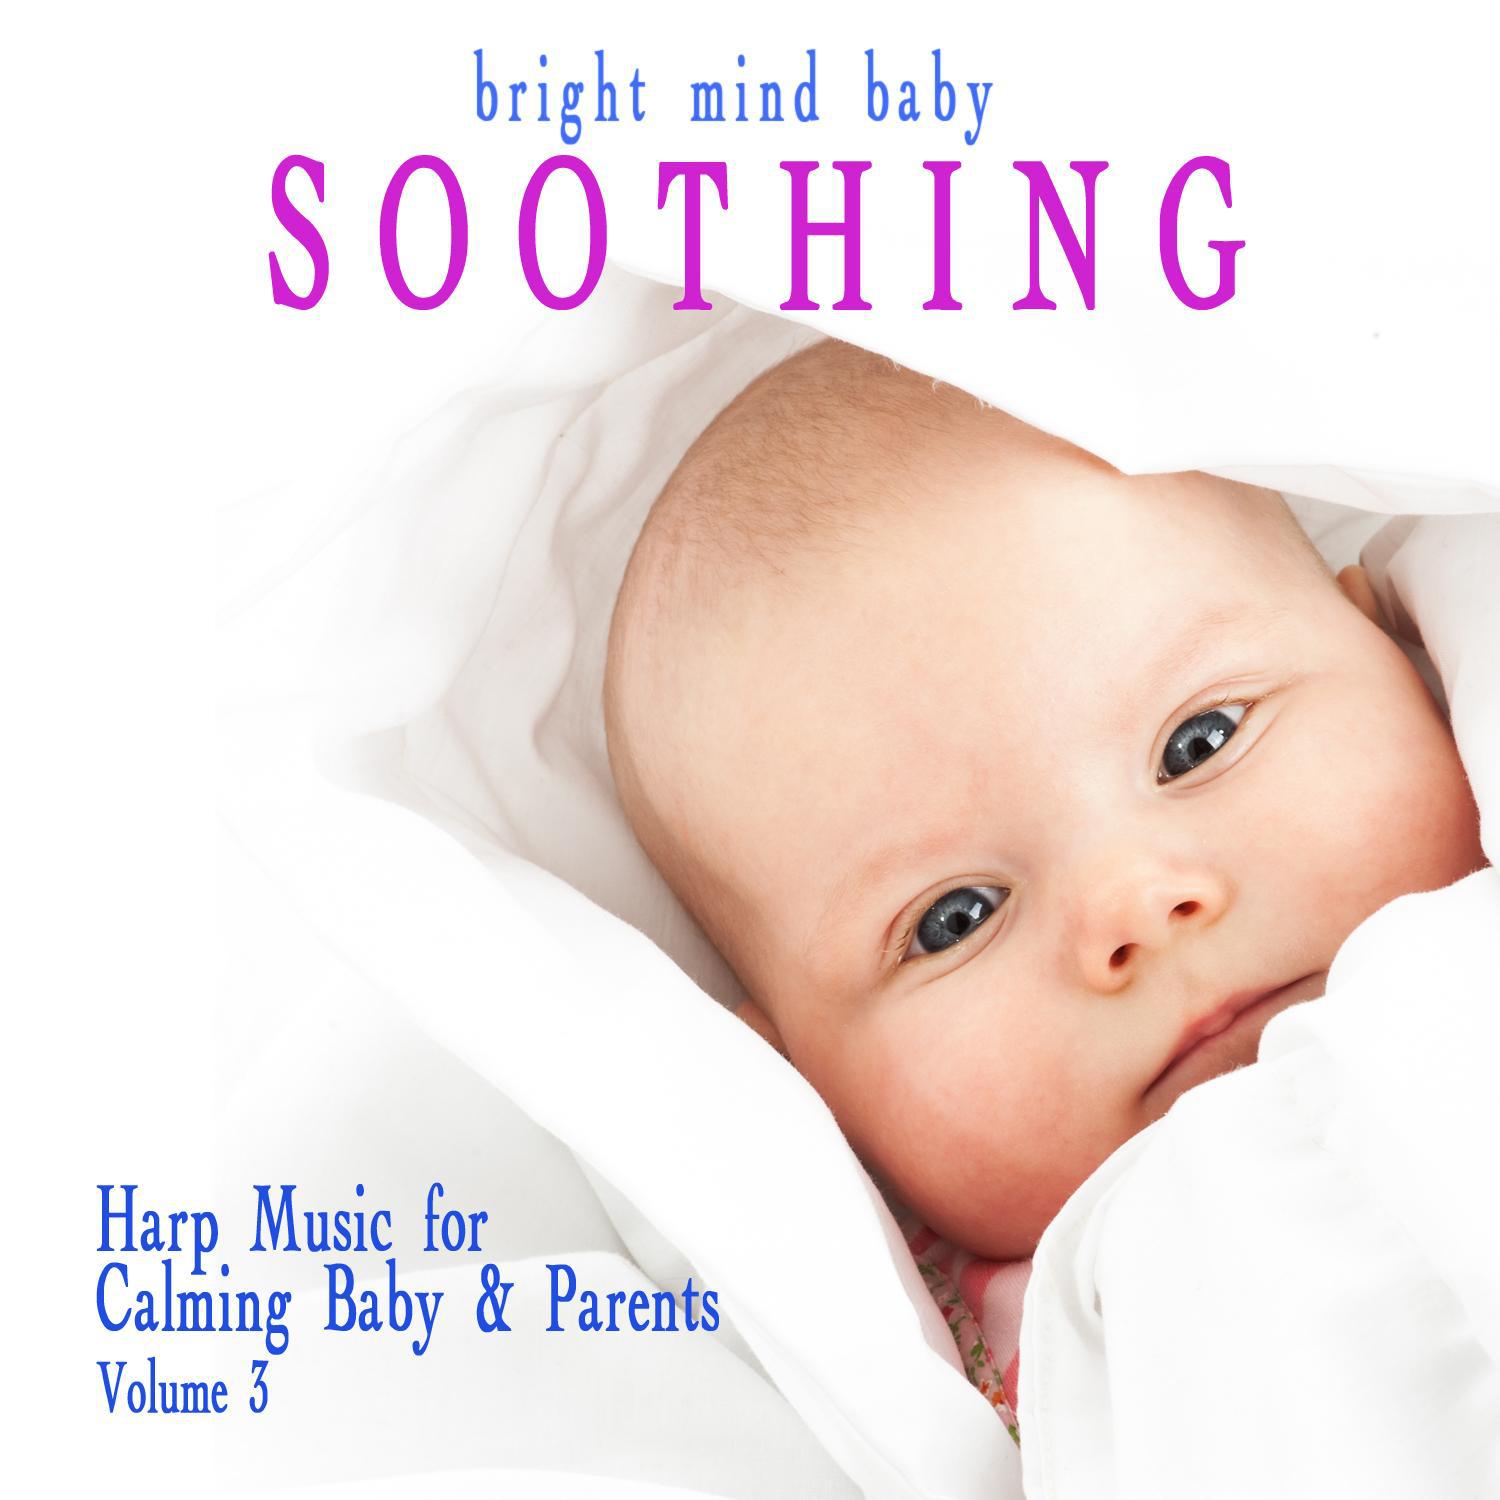 Soothing: Harp Music for Calming Baby & Parents (Bright Mind Kids), Vol. 3